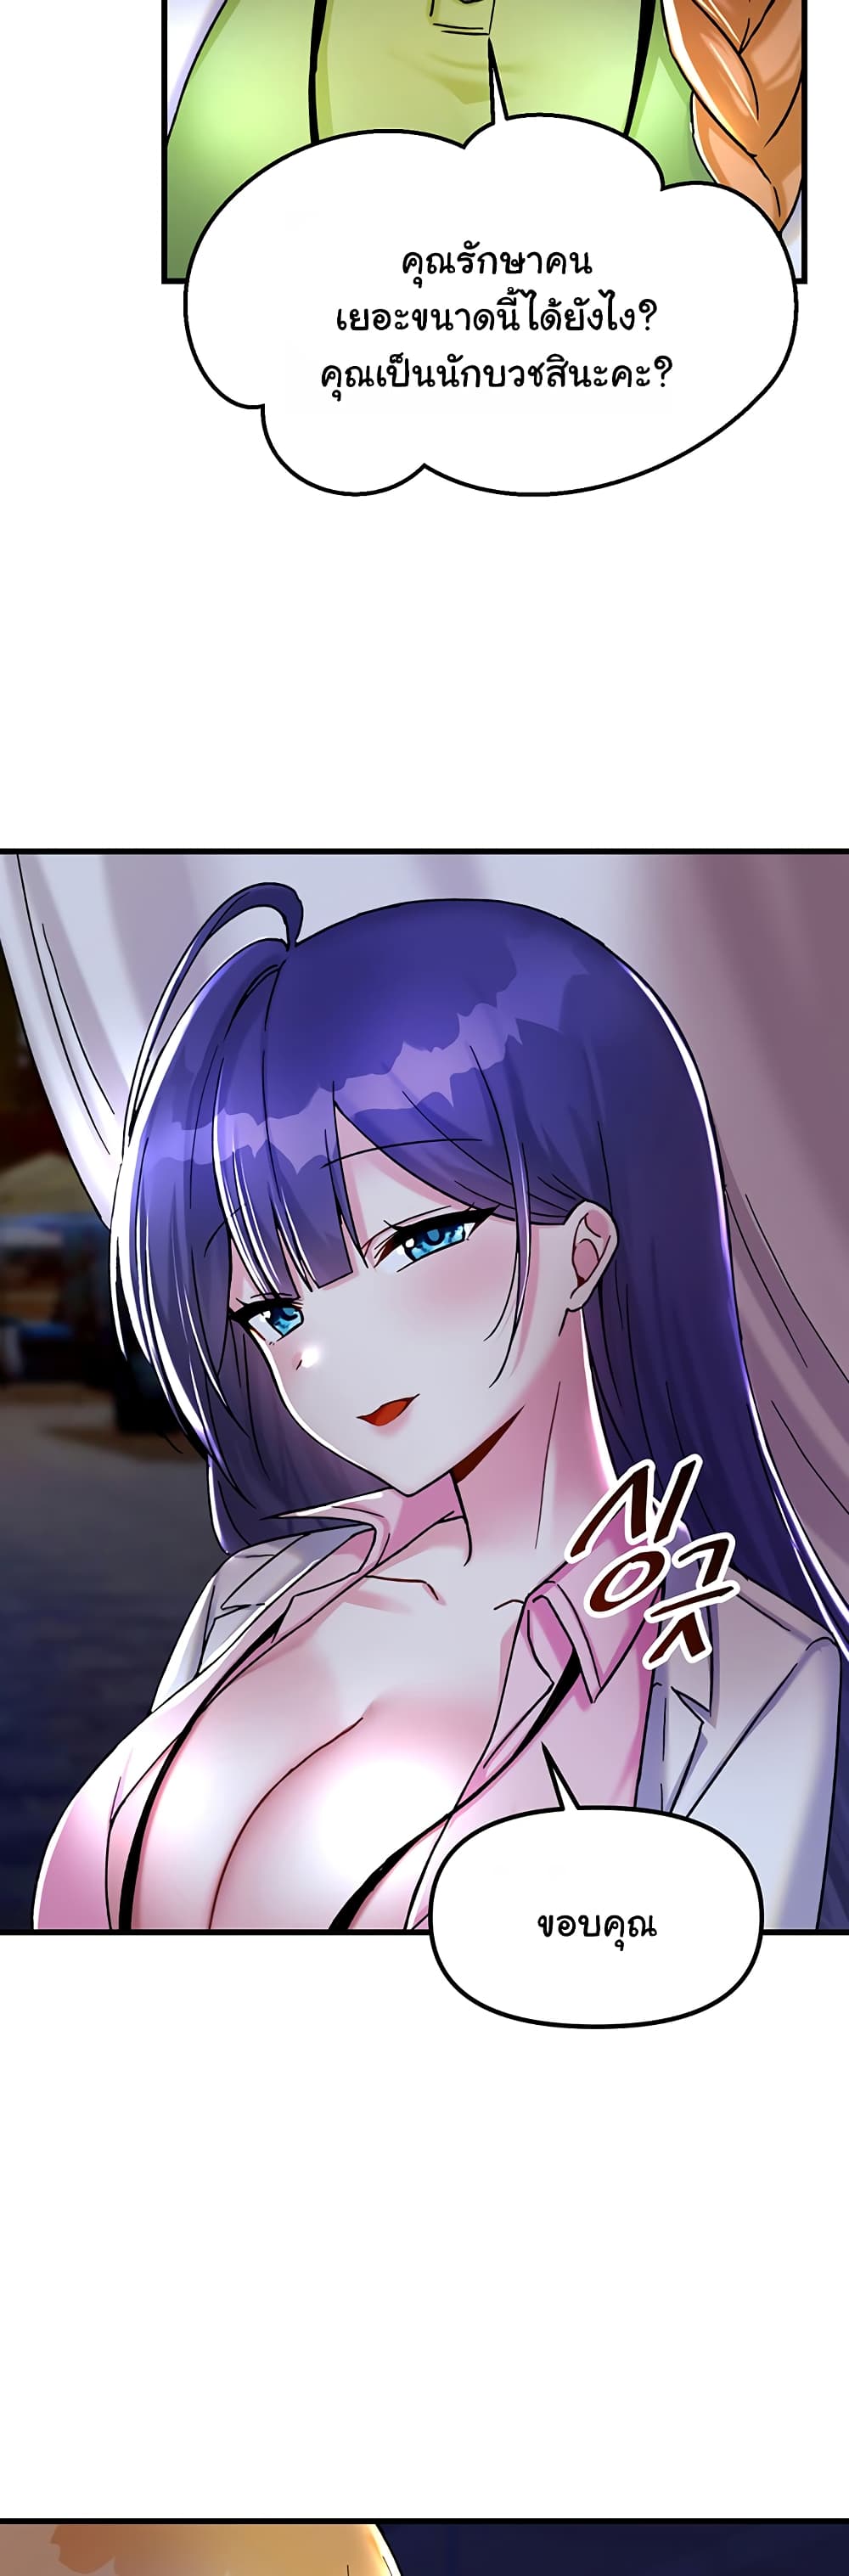 Trapped in the Academy’s Eroge 26-26